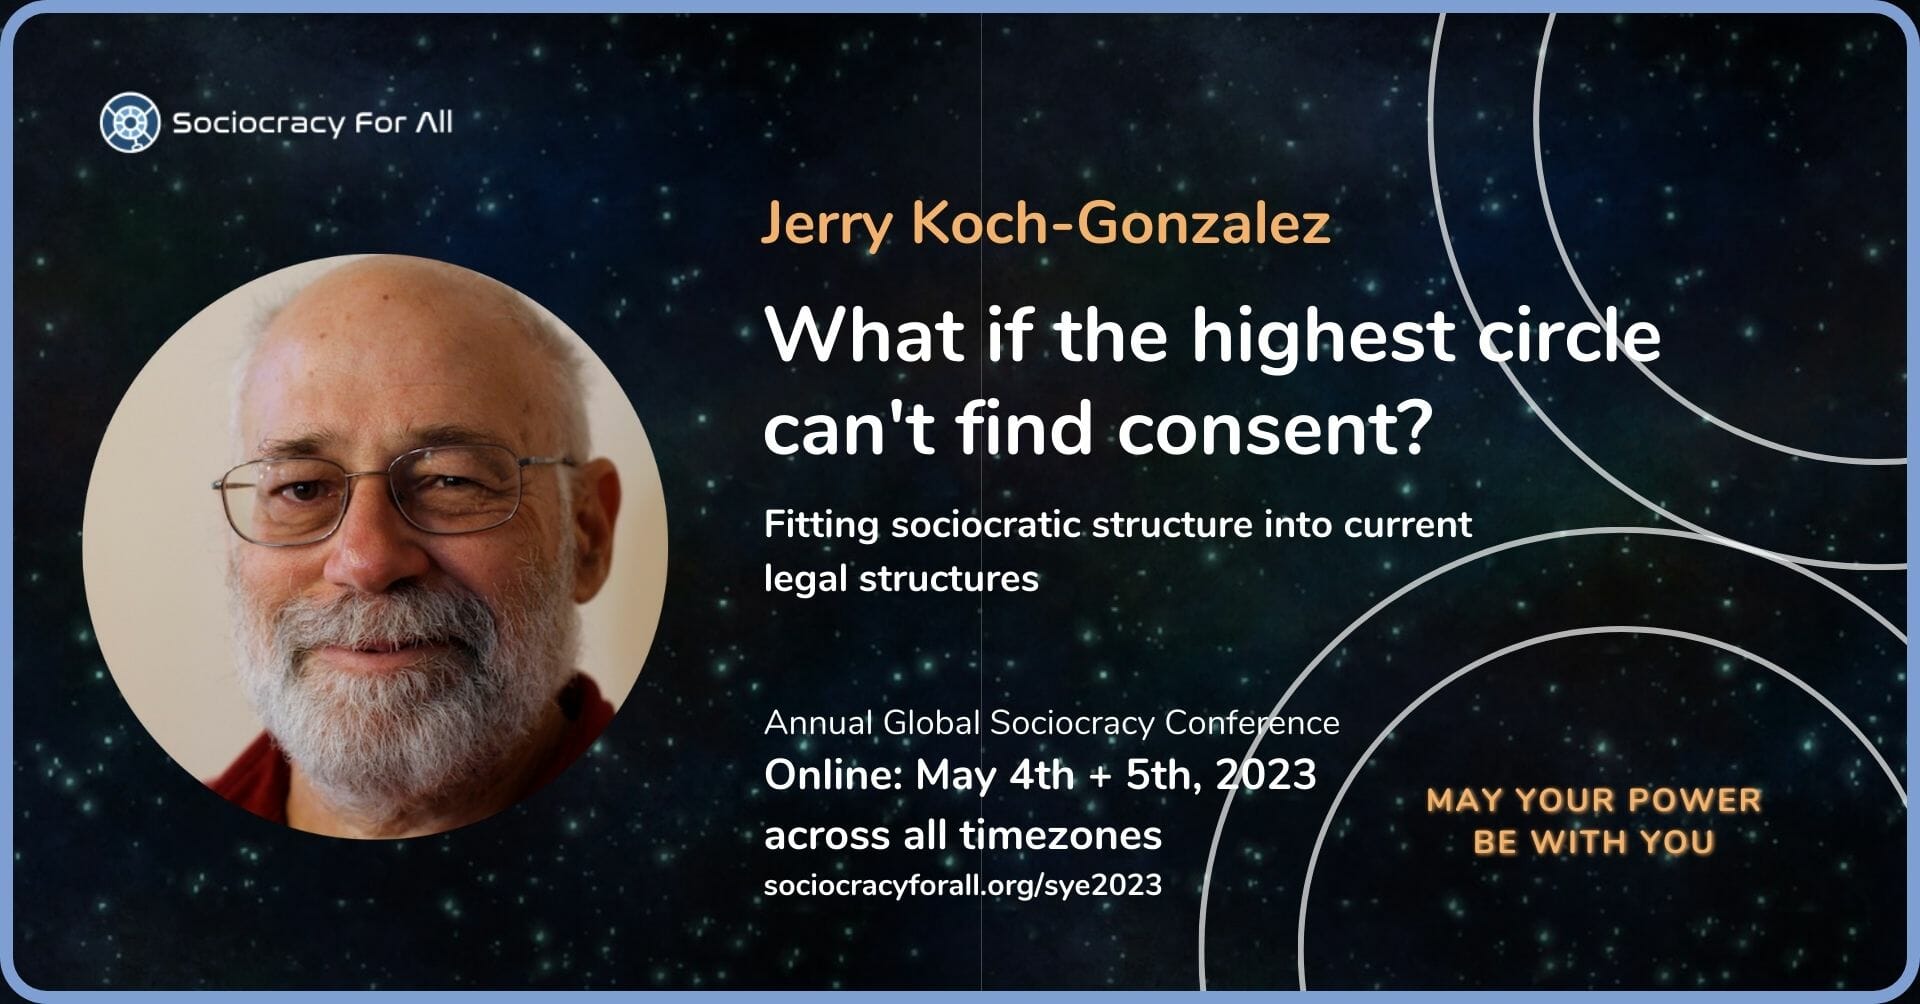 What if the highest circle can’t find consent? Fitting sociocratic structure into current legal structures